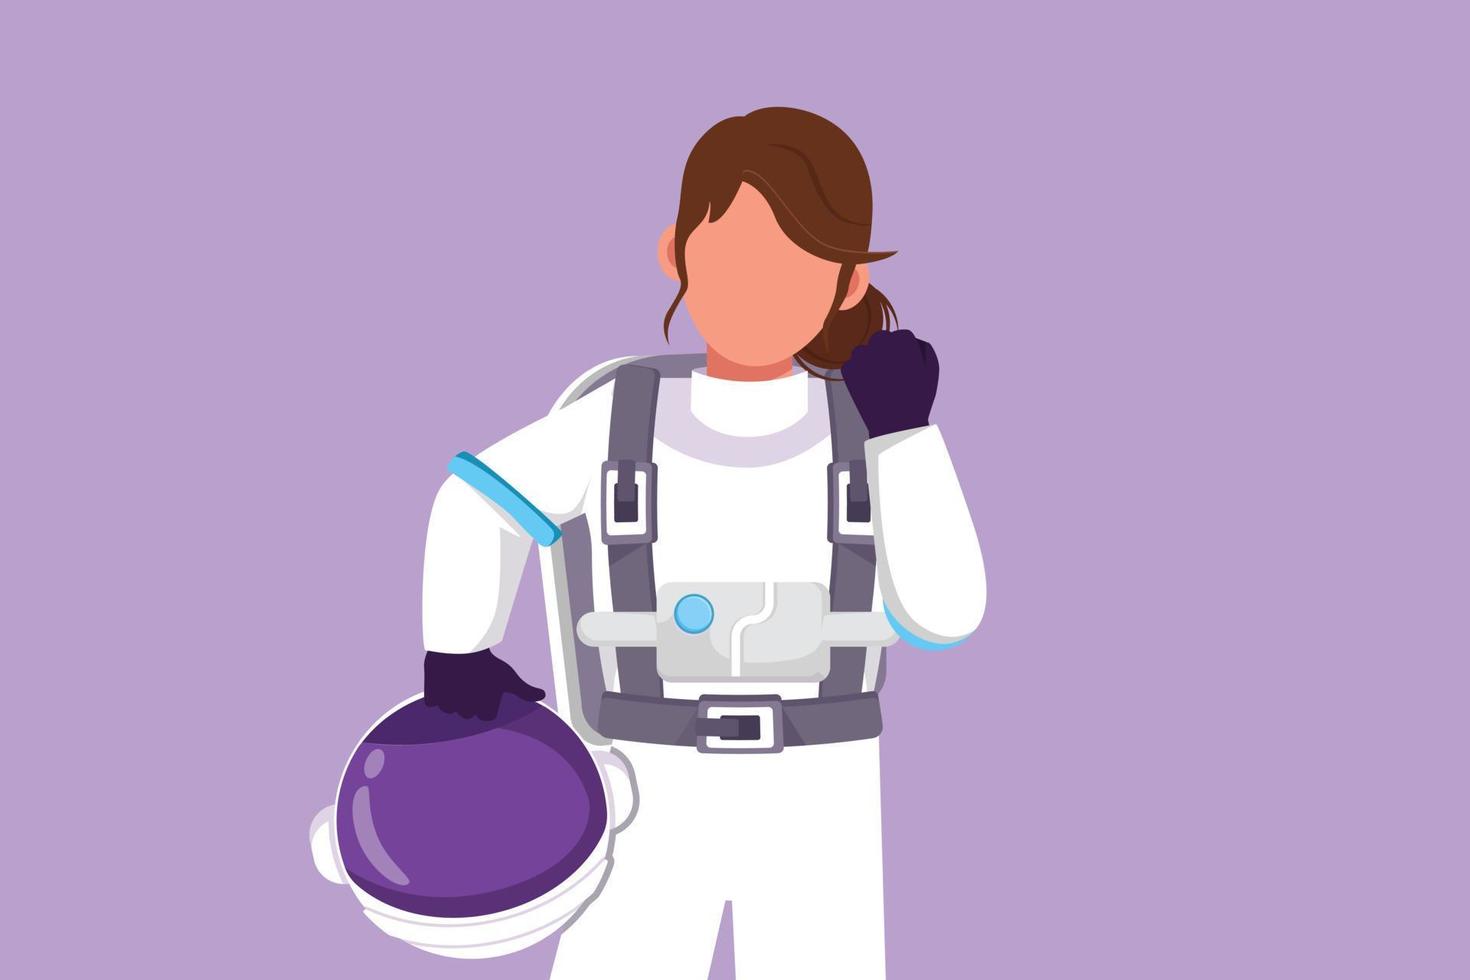 Character flat drawing cute female astronaut holding helmet with celebrate gesture wearing spacesuit ready to explore outer space in search of mysteries of universe. Cartoon design vector illustration